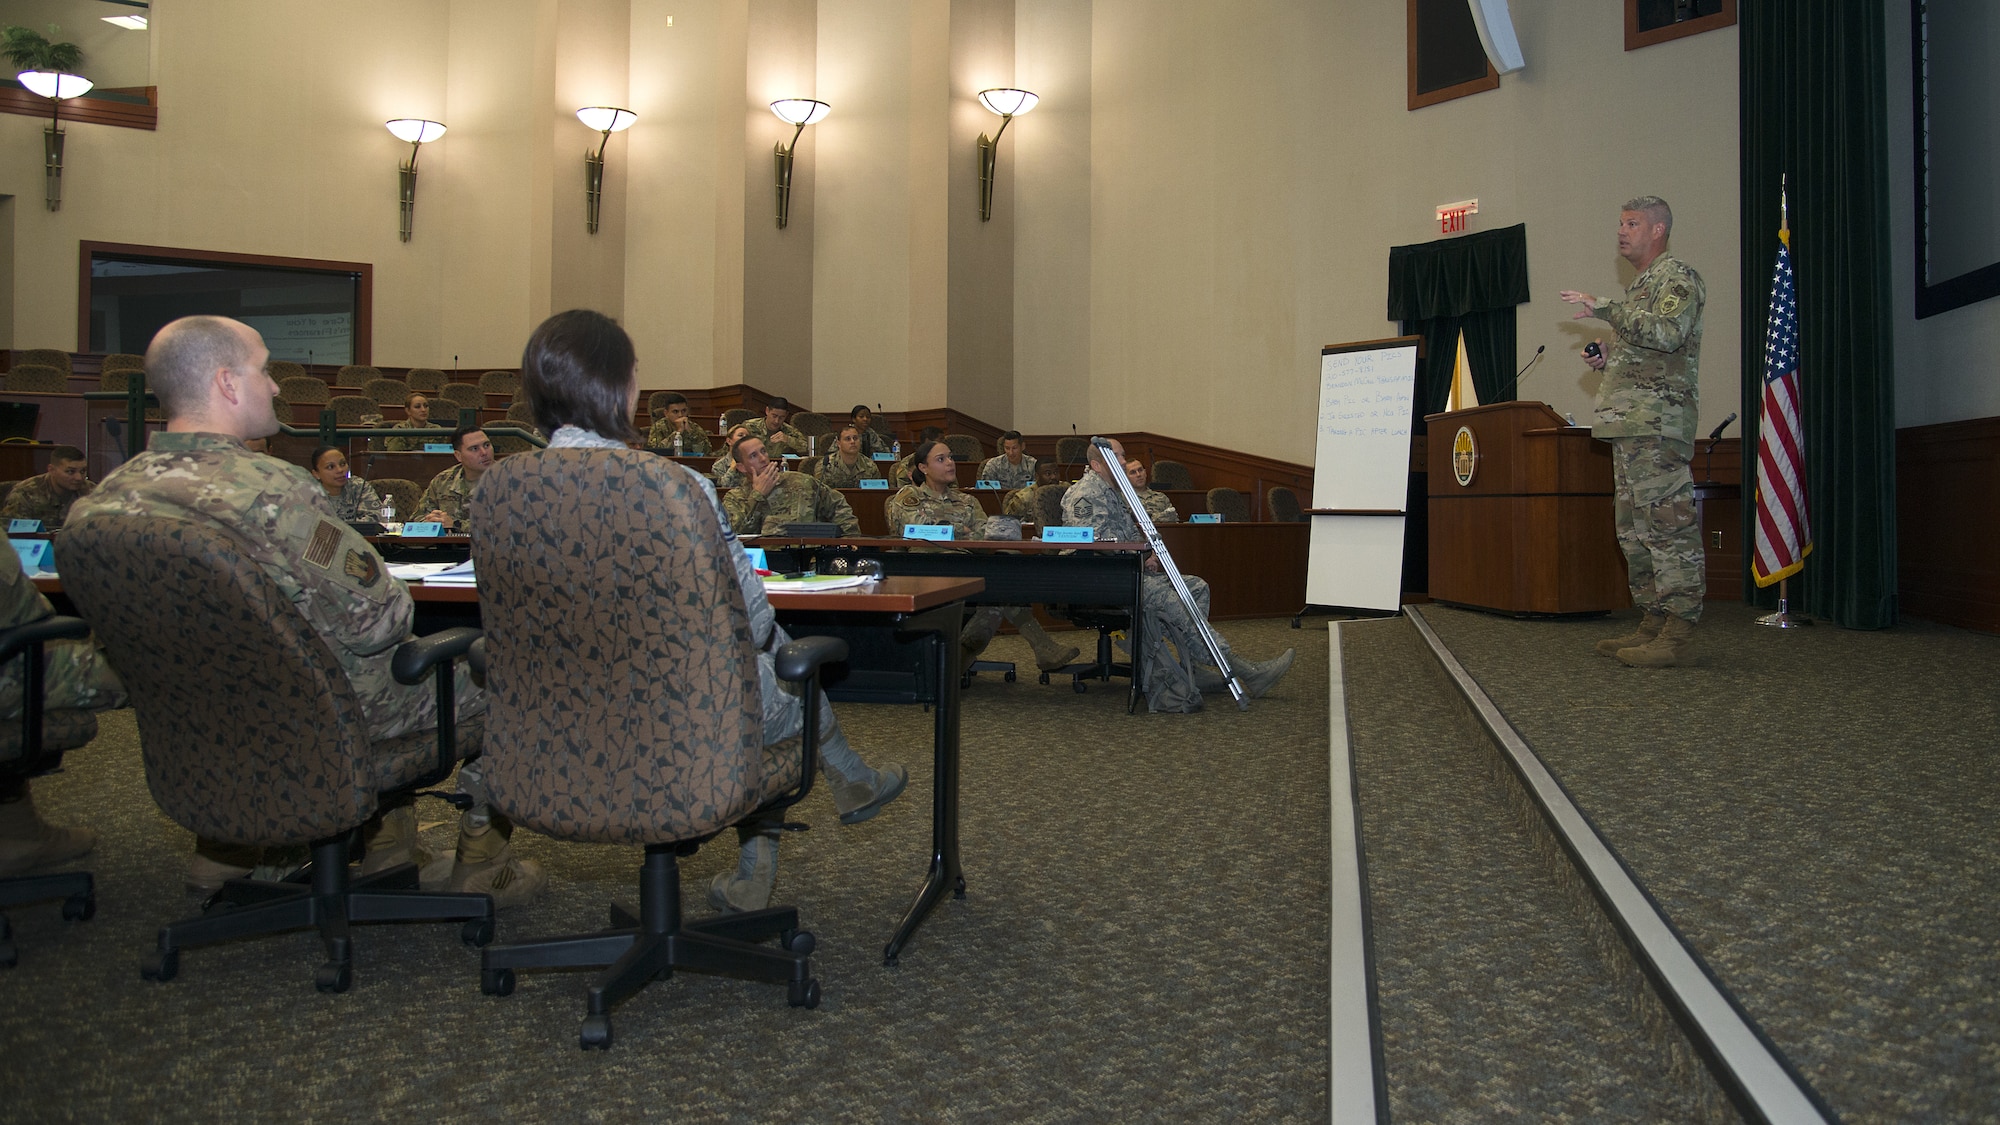 U.S. Air Force Capt. Jeremy Guy, 6th Air Mobility Wing executive officer, briefs students on resource management during the SNCO Professional Enhancement Seminar at MacDill Air Force Base, Fla., Aug. 2, 2019. This professional enhancement seminar had multiple subject matter experts and panels explain the responsibilities and expectations of a SNCO.